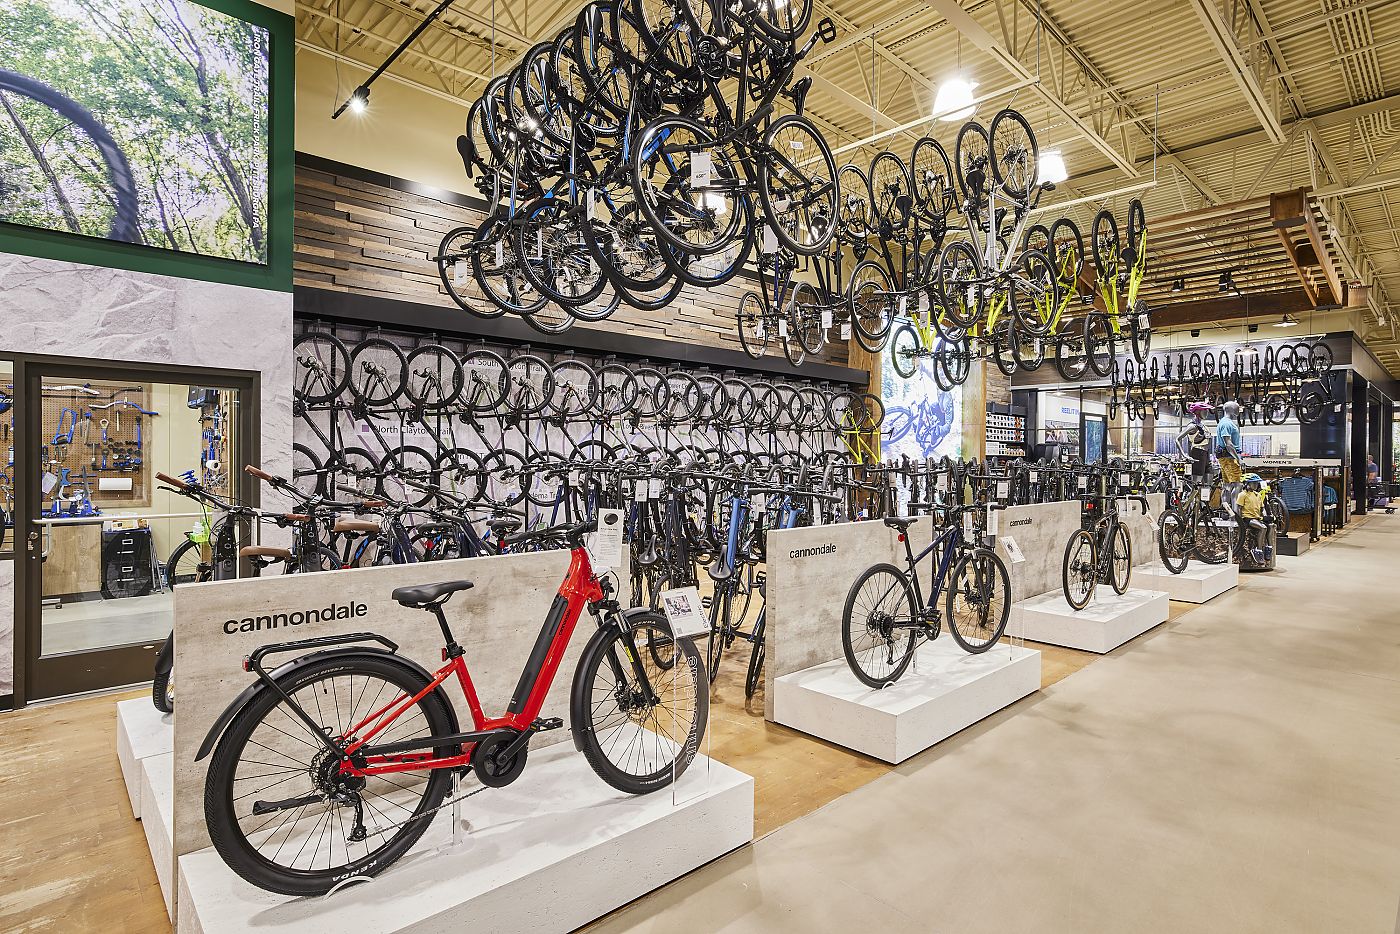 Cannondale bikes will be featured at new Public Lands speciality stores Bicycle Retailer and Industry News